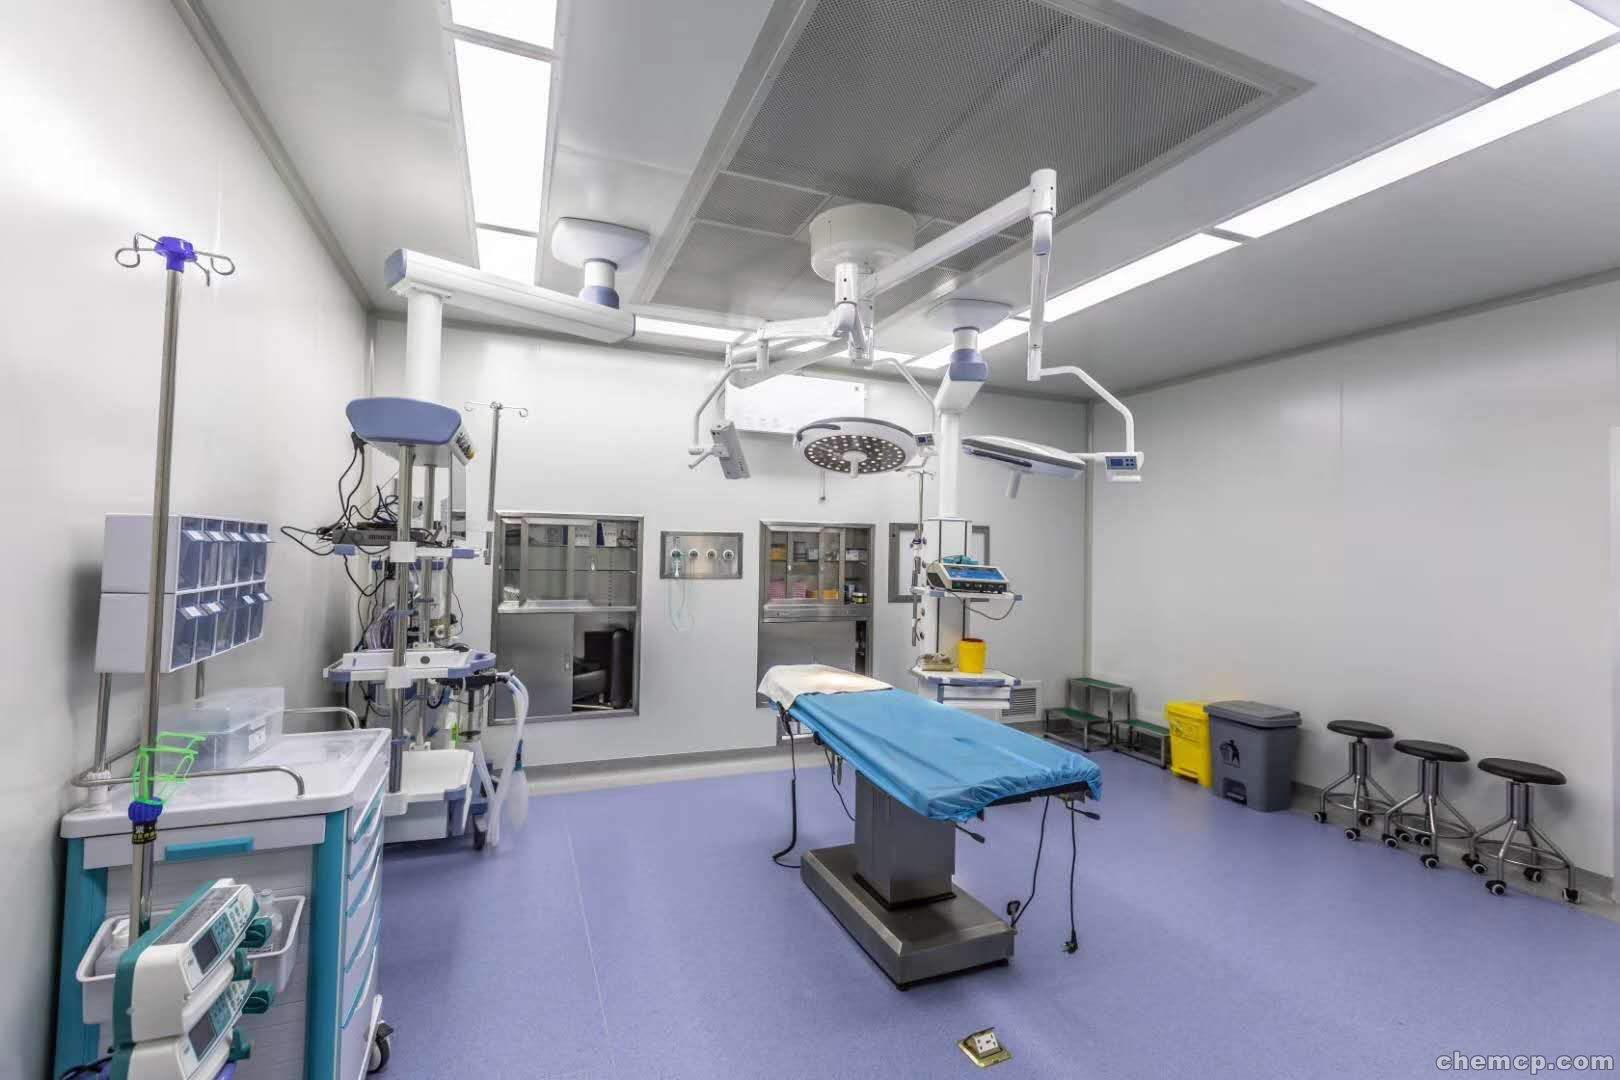 Purification design of operating room